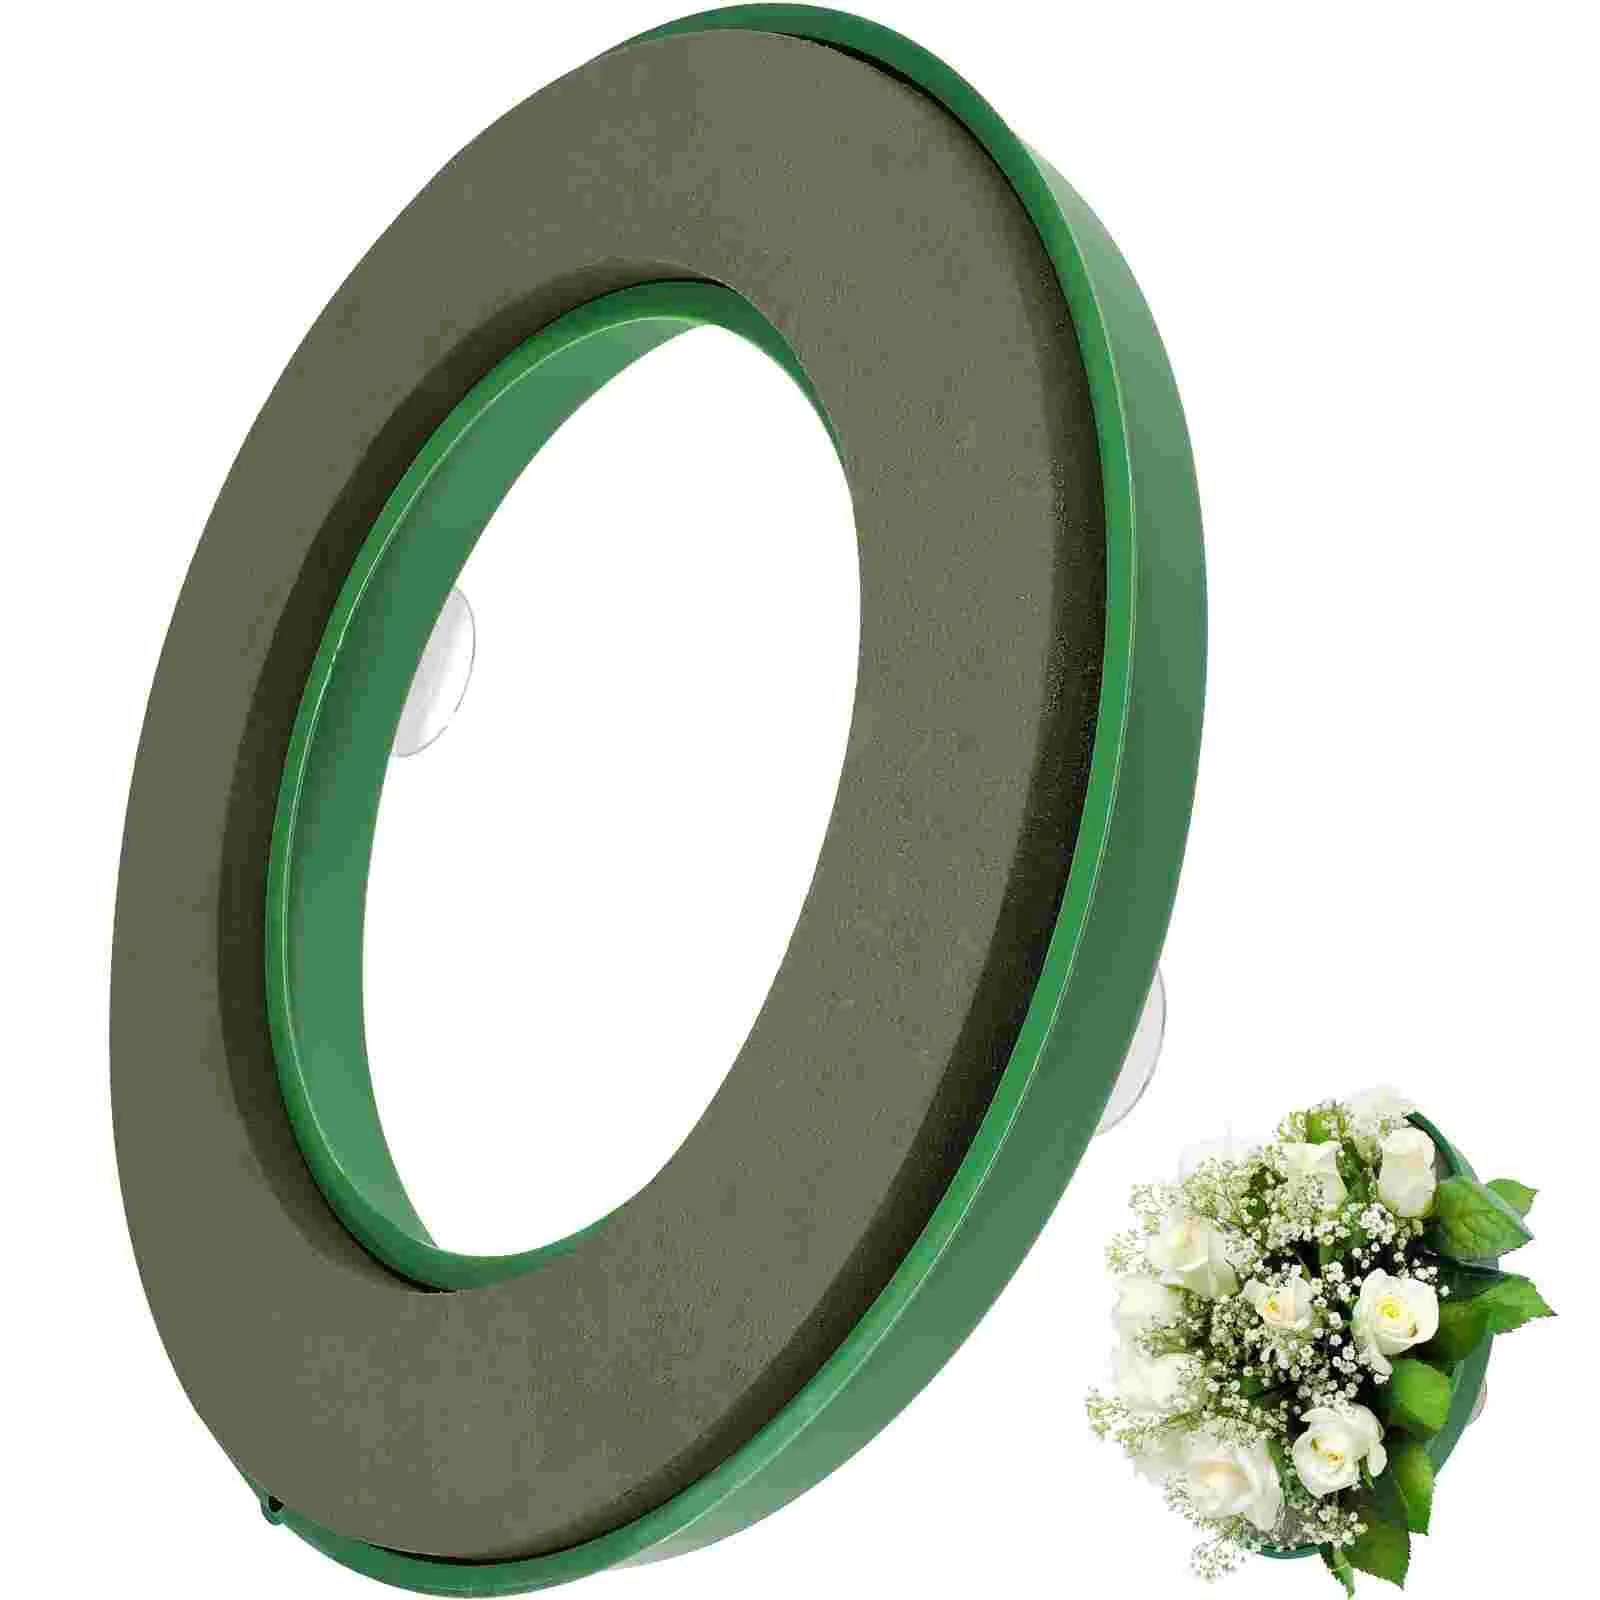 

Wreath Form Foam Circles Floral Projects Hoop Mud Block Rings Craft Making Supplies